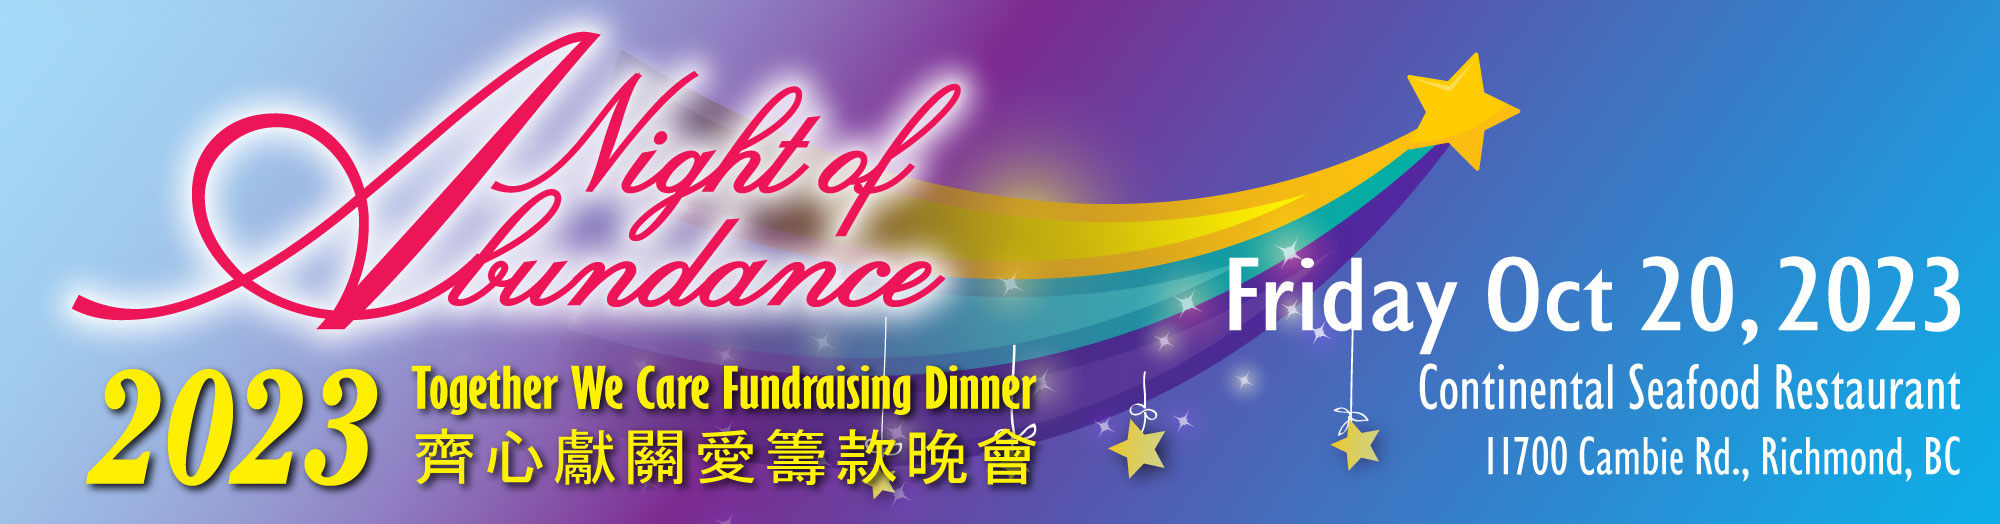 A Night of Abundance - RCD 2023 Together We Care Fundraising Dinner, Friday, Oct.20, 2023 at Continental Seafood Restaurant - 11700 Cambie Road, Richmond, BC